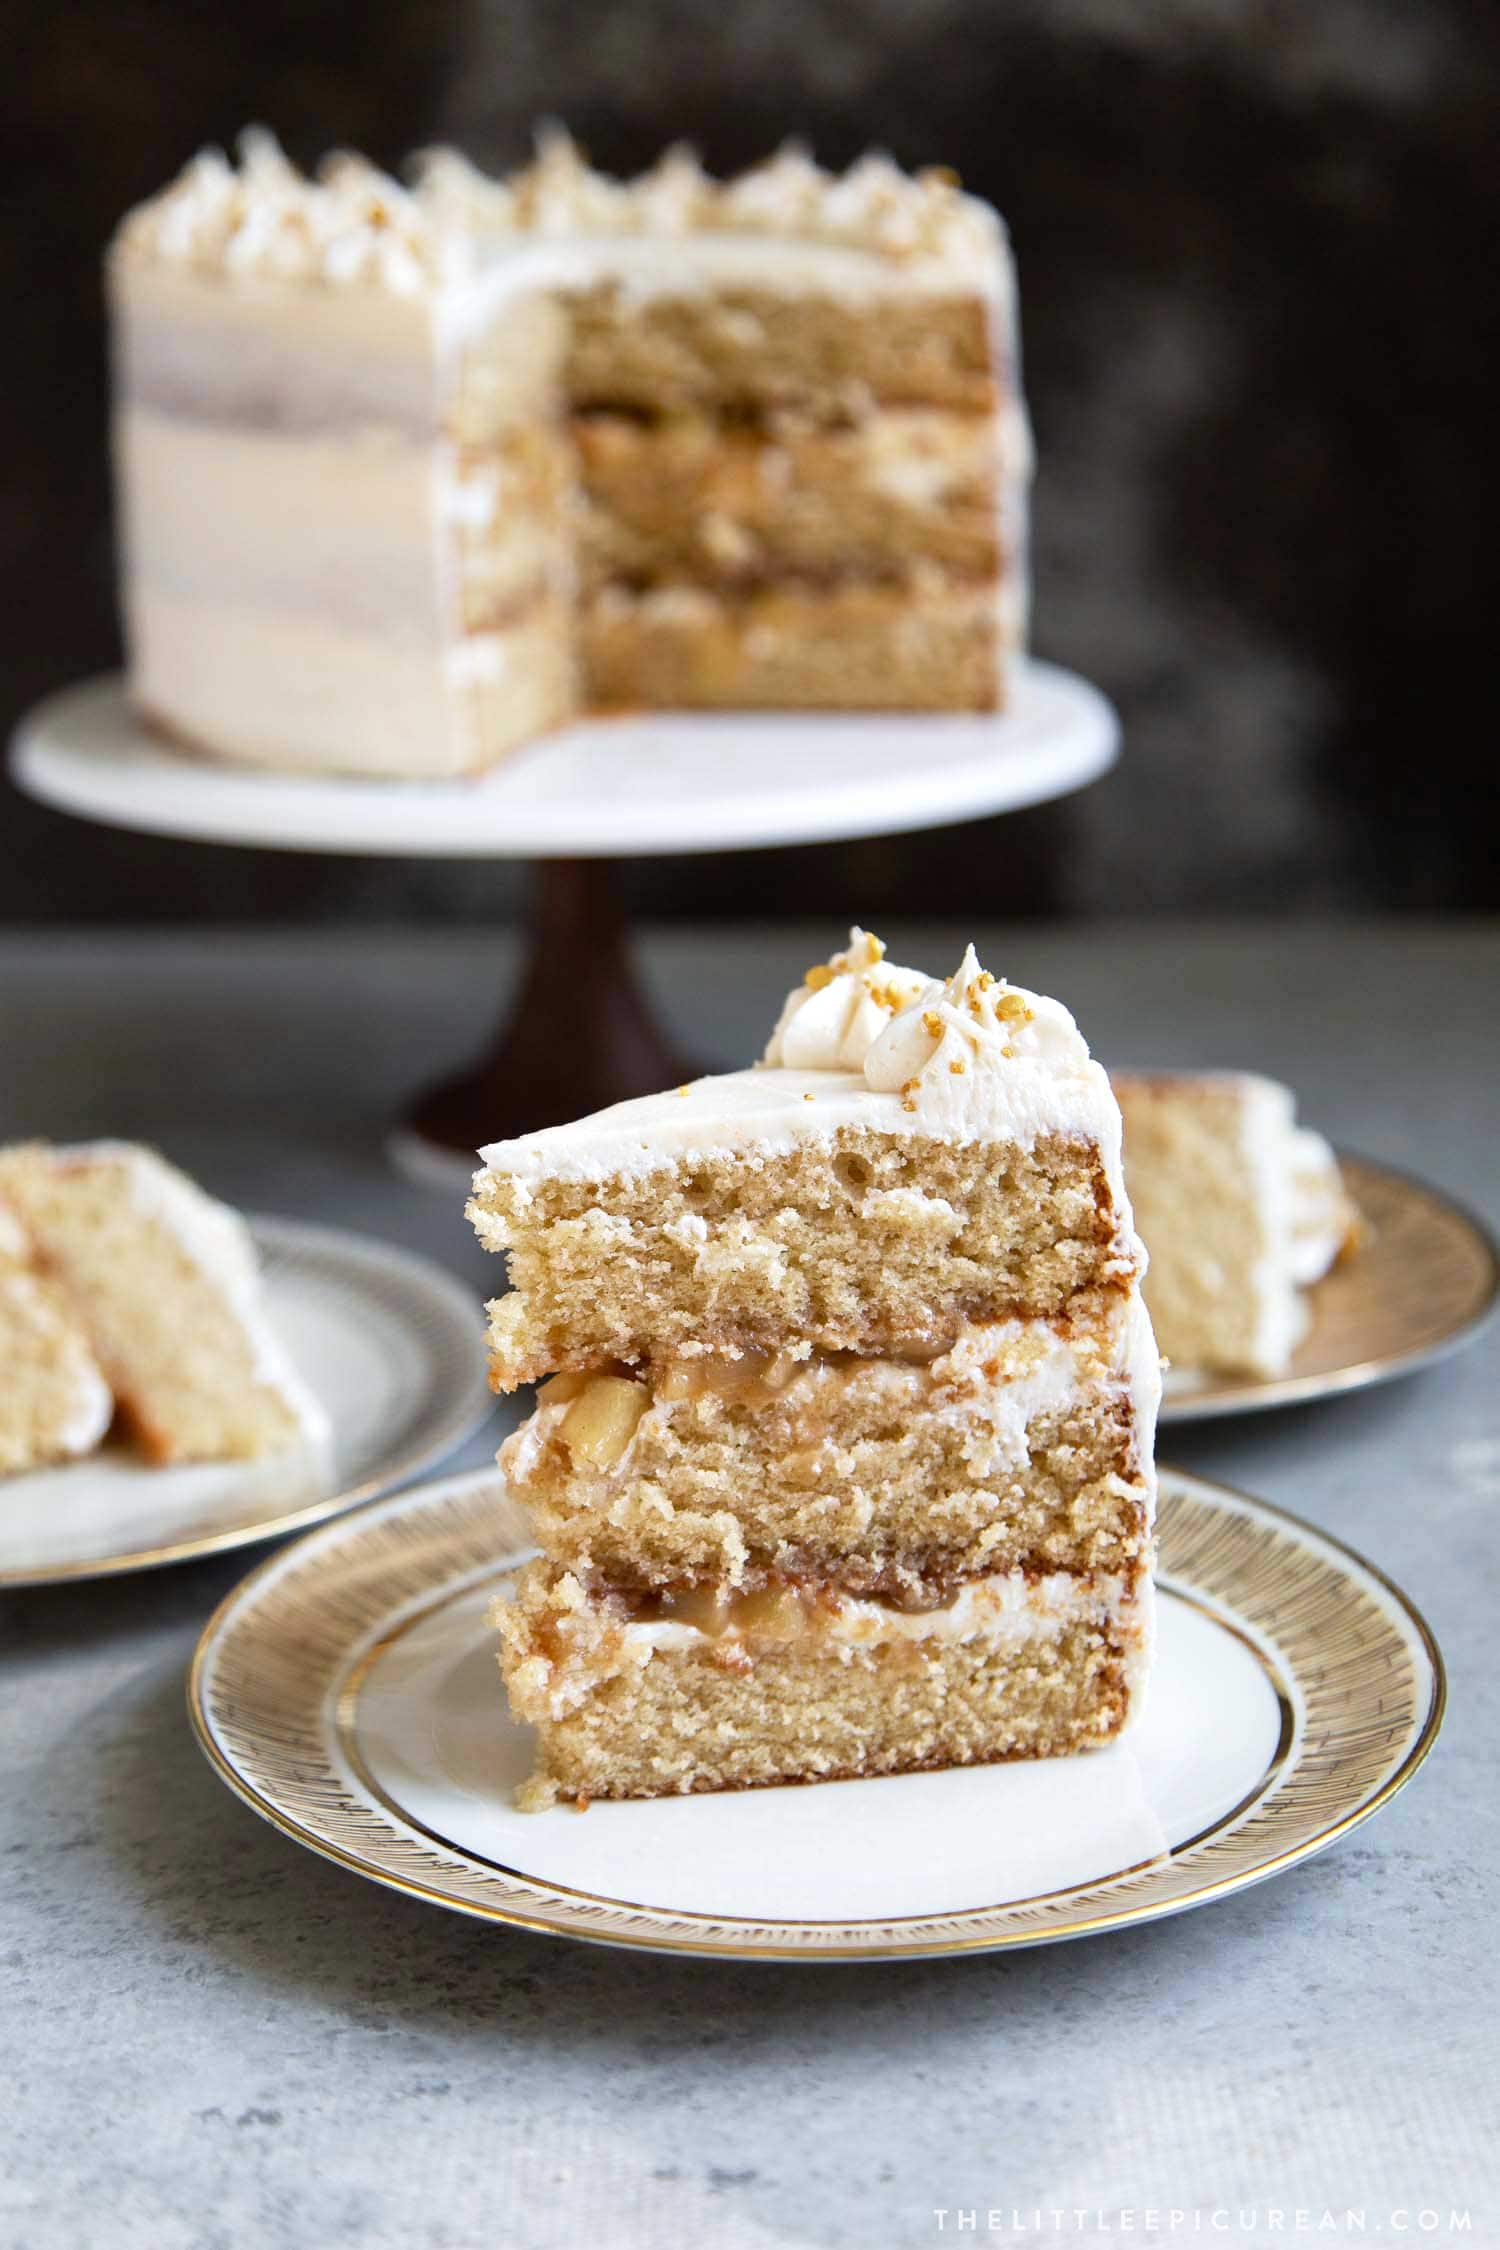 Apple Cider Layer Cake. Yellow cake flavored with apple cider. Layered cake is filled with cooked apples and frosted with apple cider buttercream.